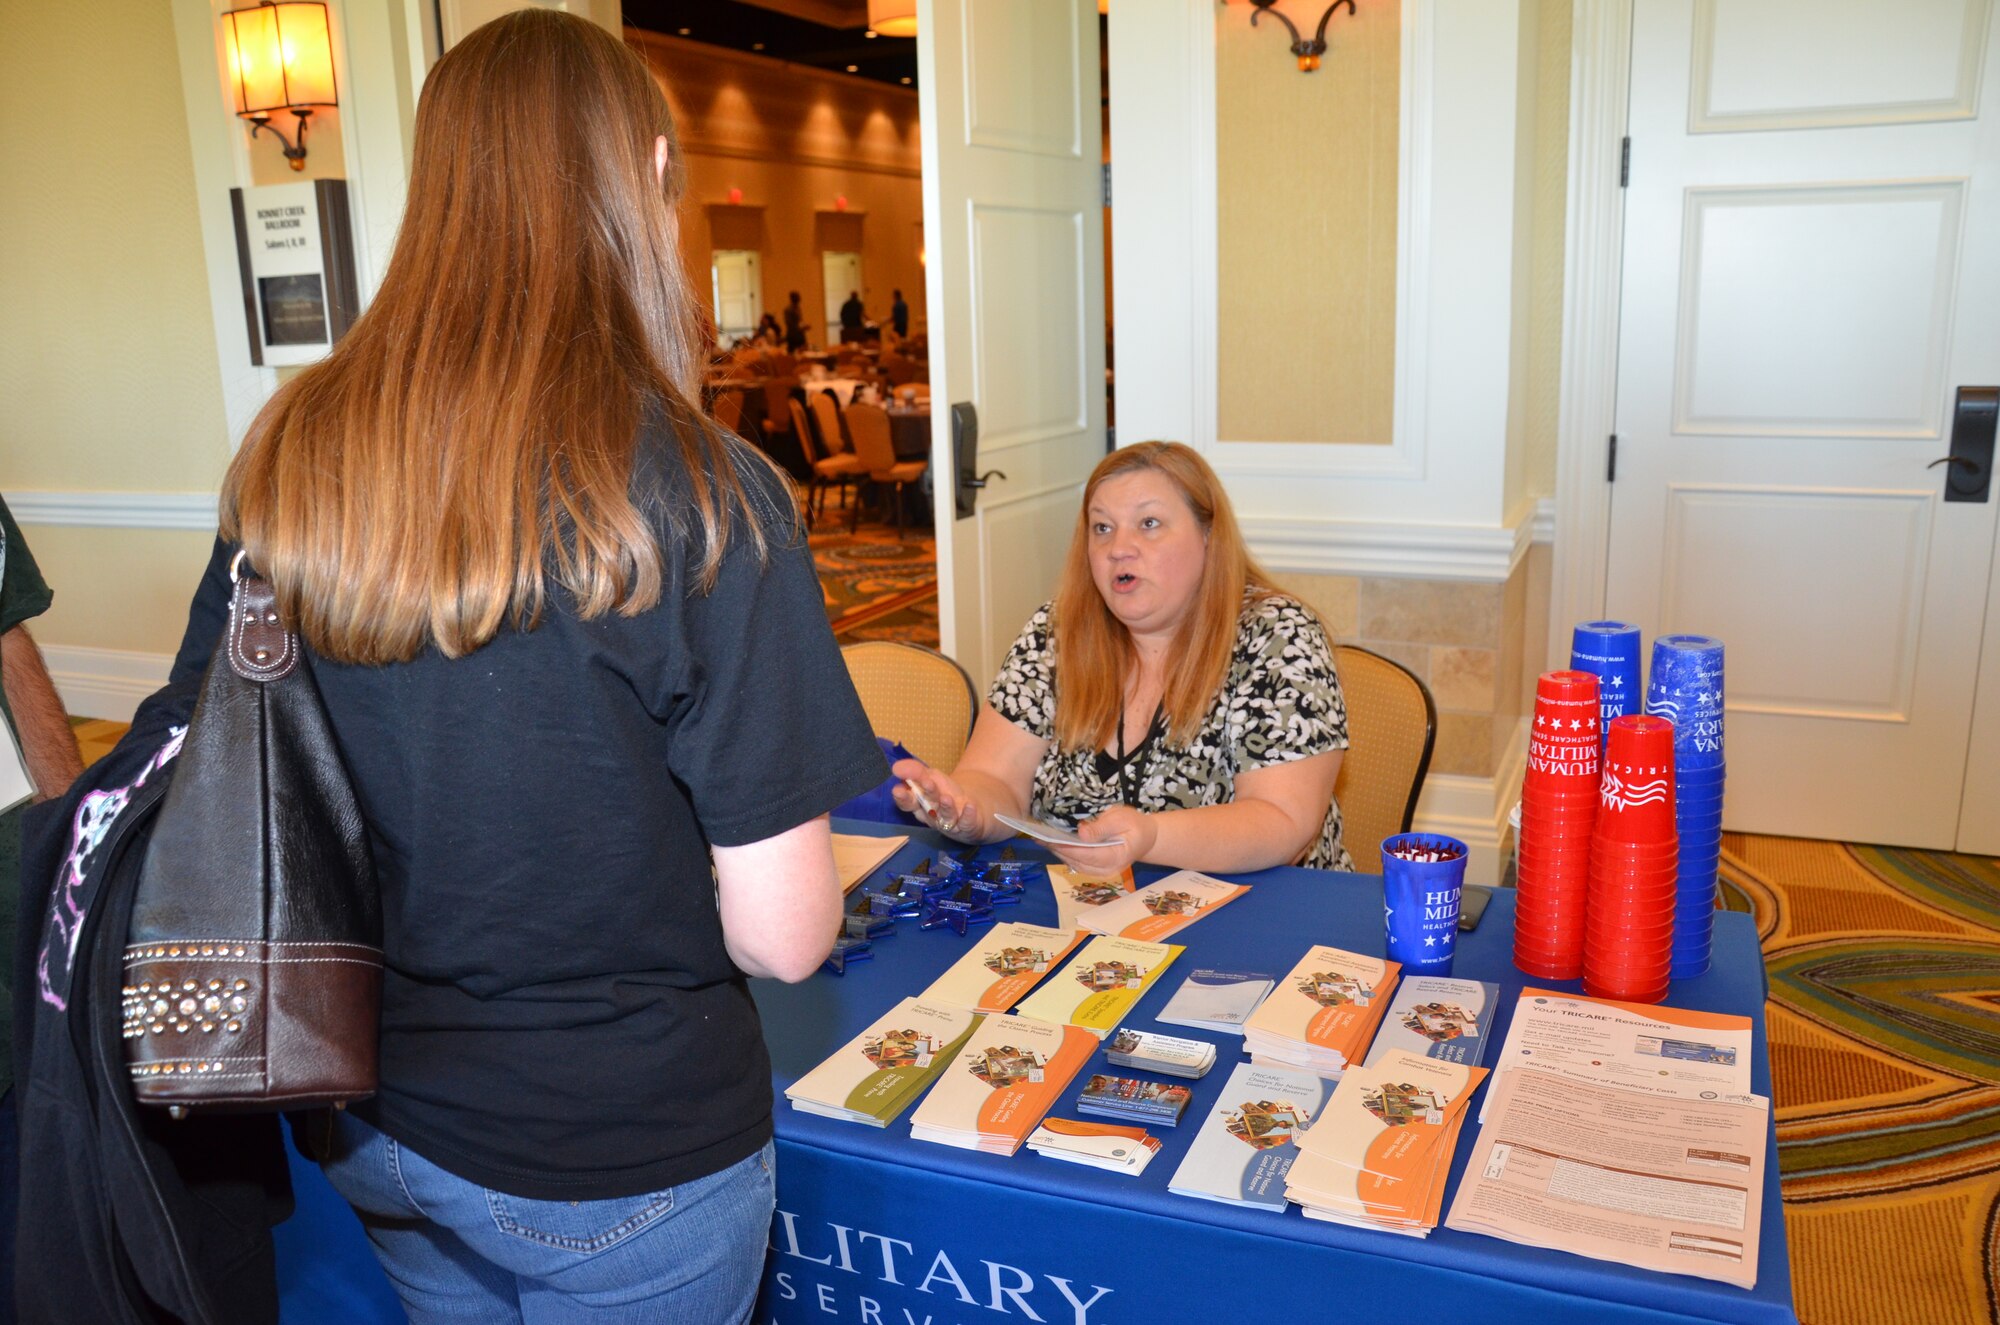 A community partner speaks with an attendee at Air Force Reserve Command’s Yellow Ribbon event in Orlando, Fla., Dec. 17, 2011. The Yellow Ribbon Program was initiated by the Secretary of Defense and mandated by Congress in 2008 to provide information, services, referral and proactive outreach programs to Reservists and Guardsmen and their dependents through all phases of deployment cycles. (U.S. Air Force photo/Staff Sgt. Anna-Marie Wyant)